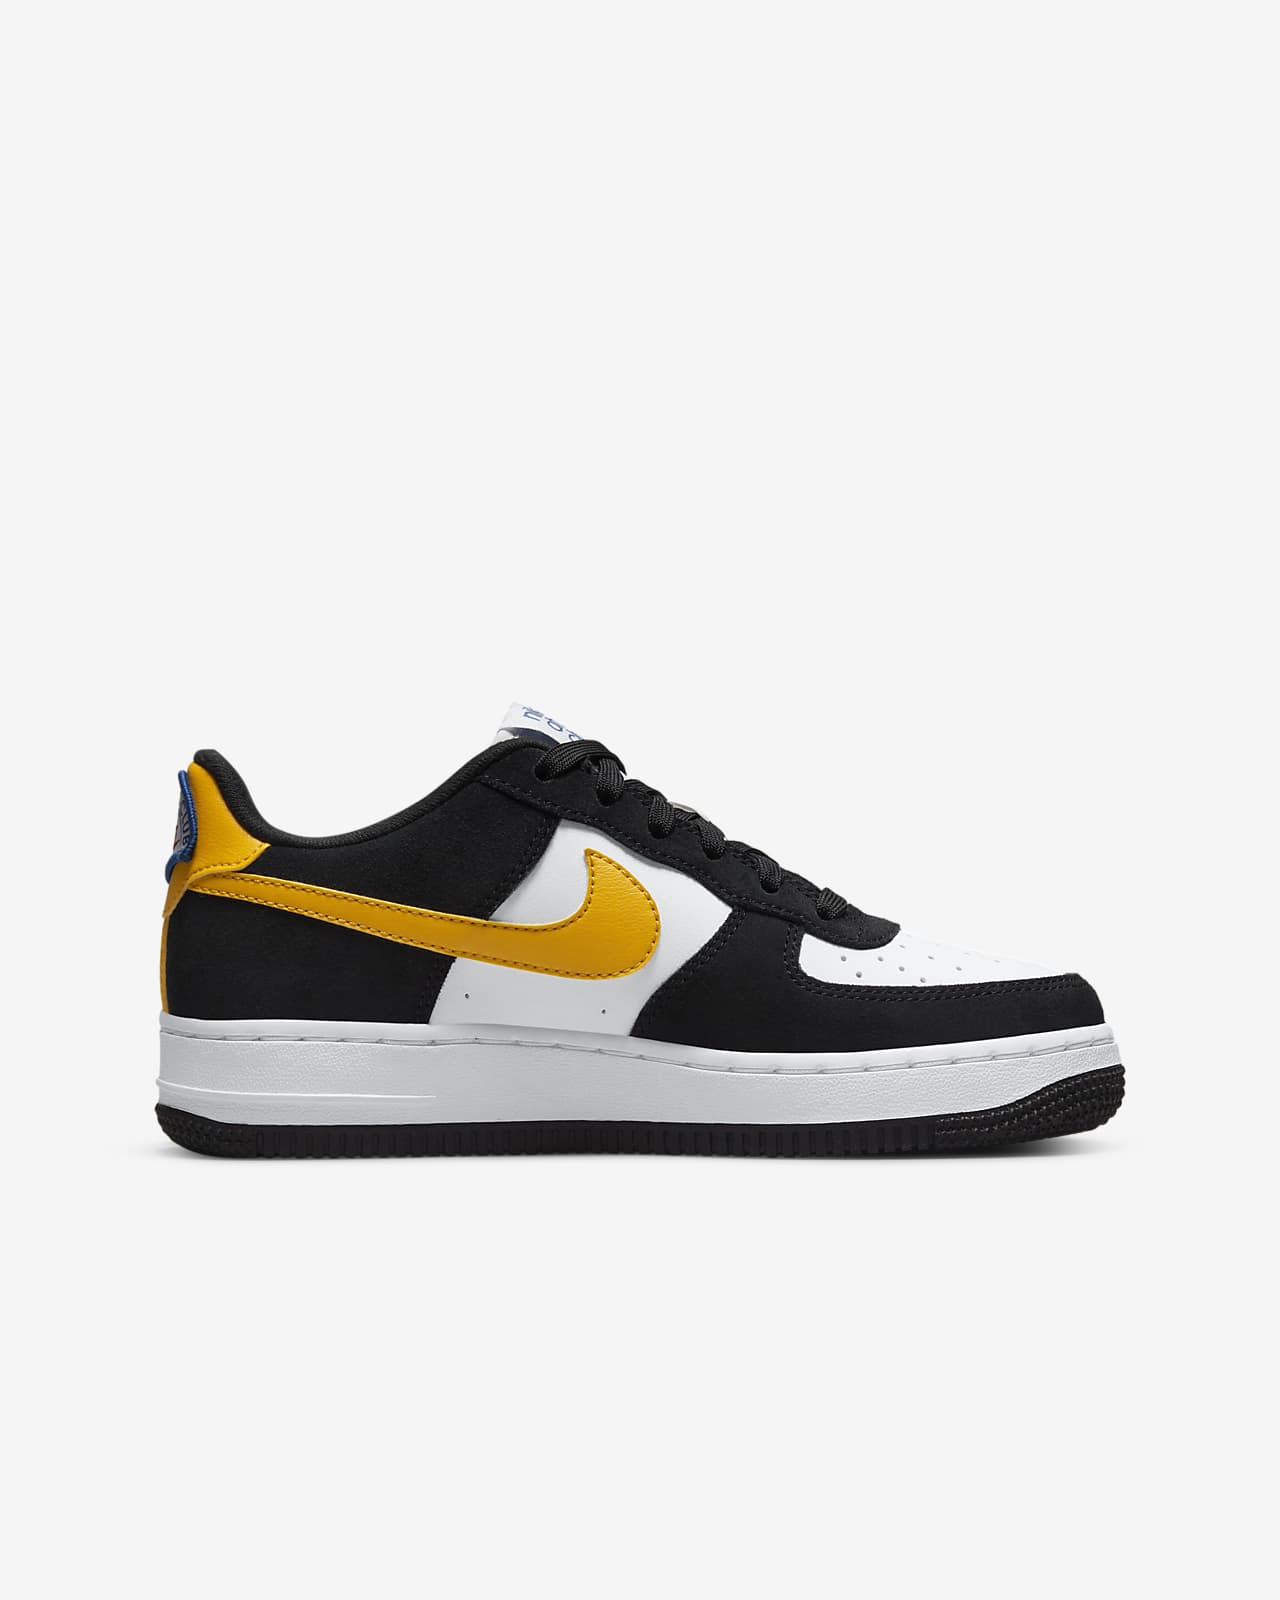 Nike Air Force 1 LV8 Big Kids' Shoes in Black, Size: 5.5Y | DH9597-002